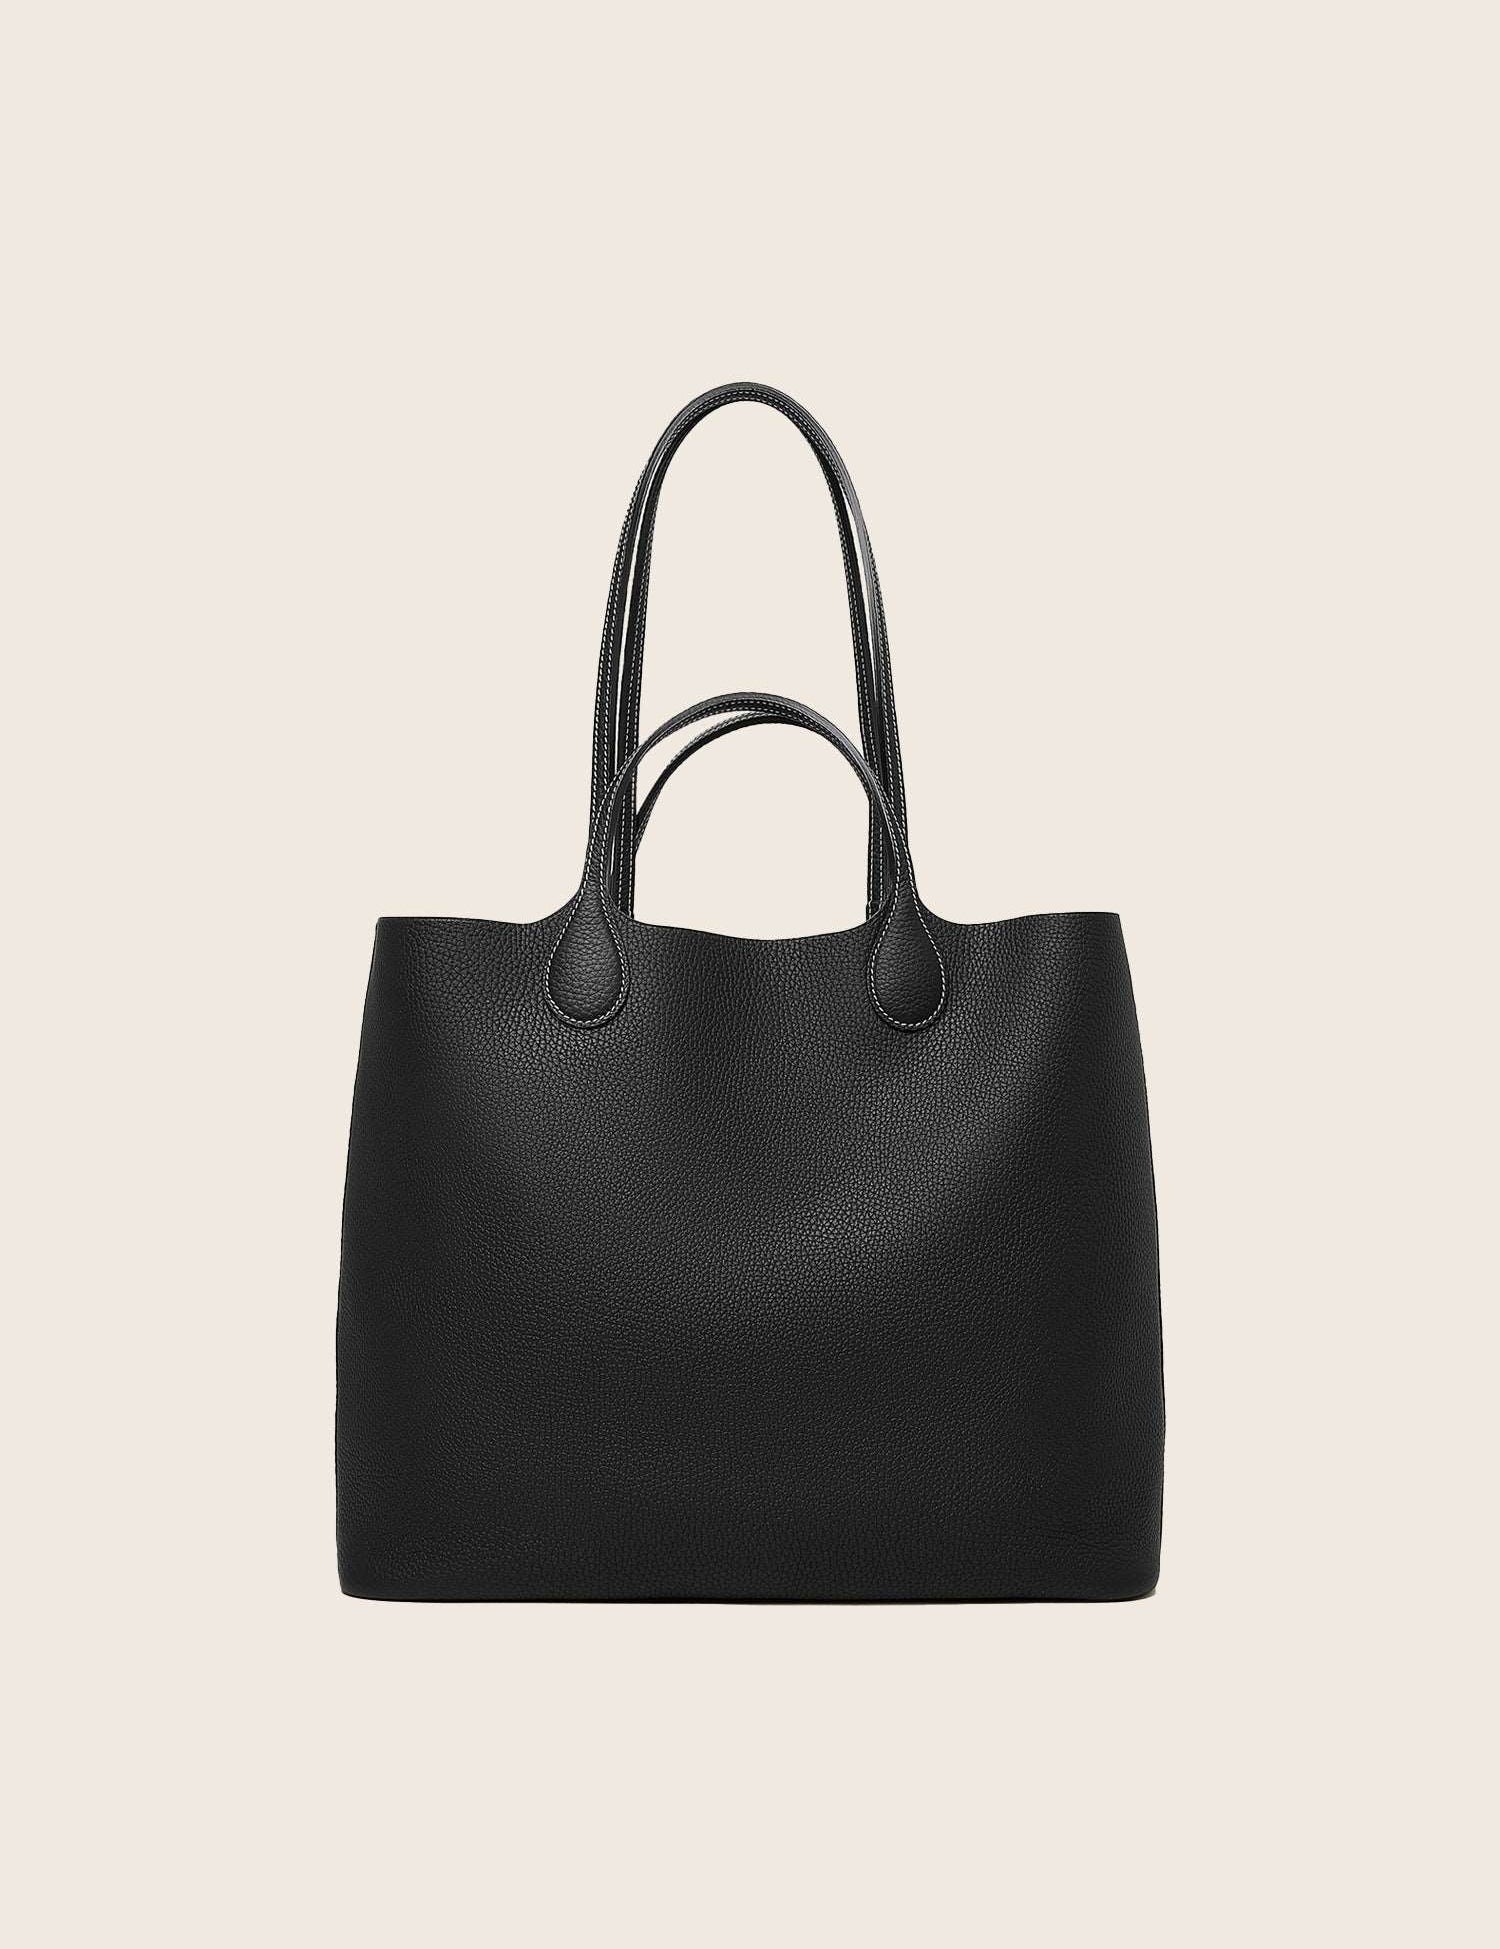 Hpai Large Yesod Tote Bag in Leather - Black